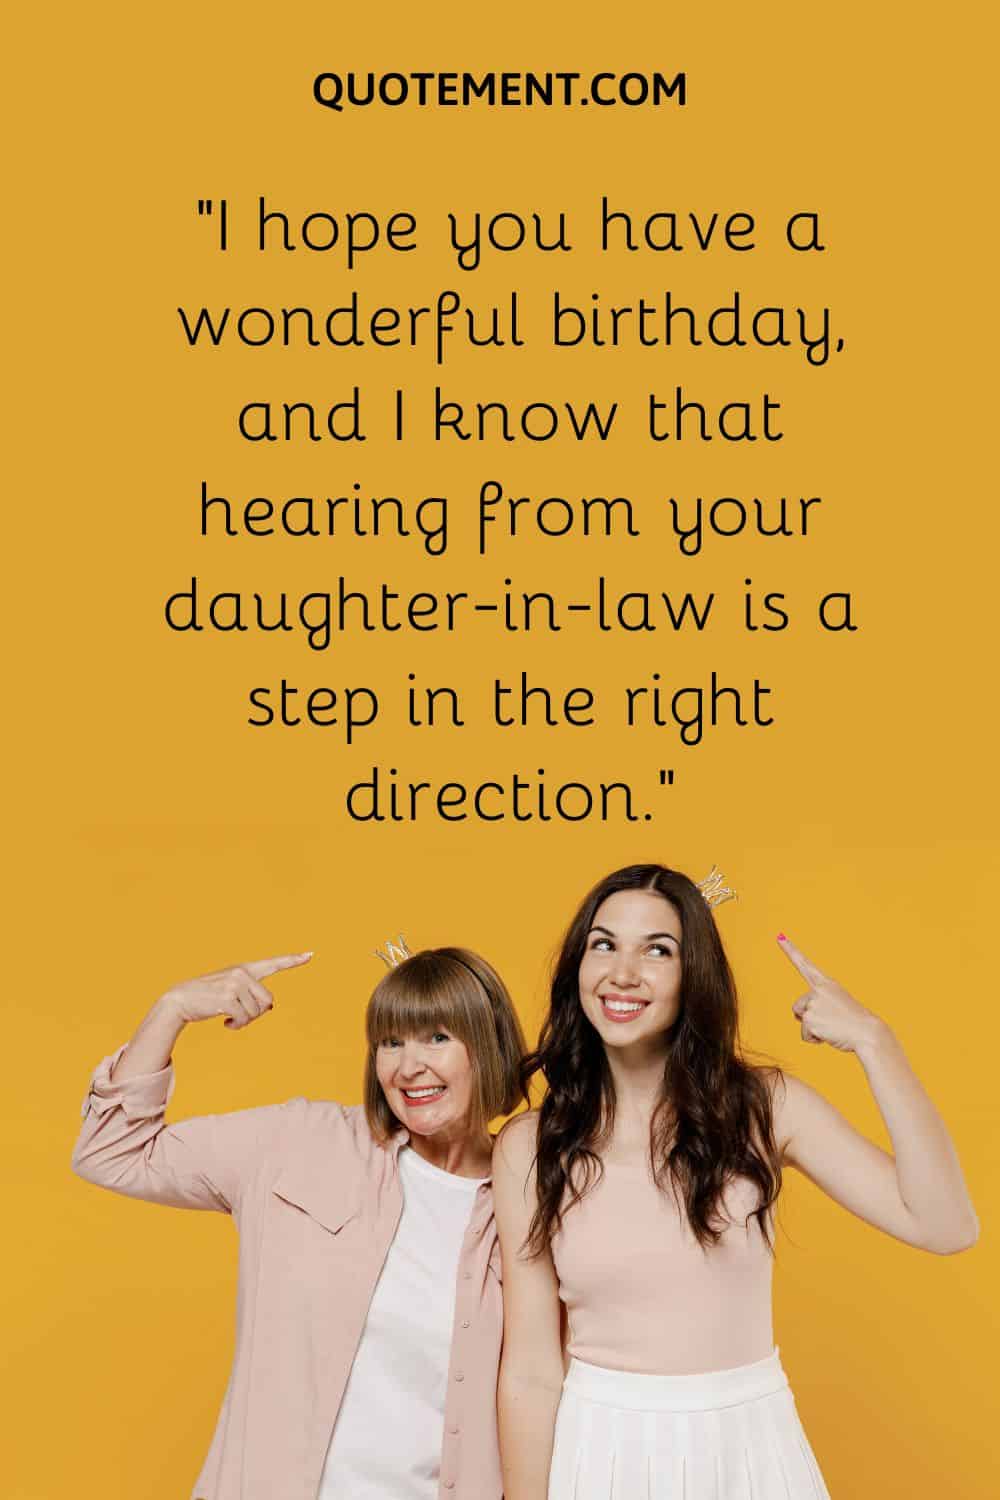 I hope you have a wonderful birthday, and I know that hearing from your daughter-in-law is a step in the right direction